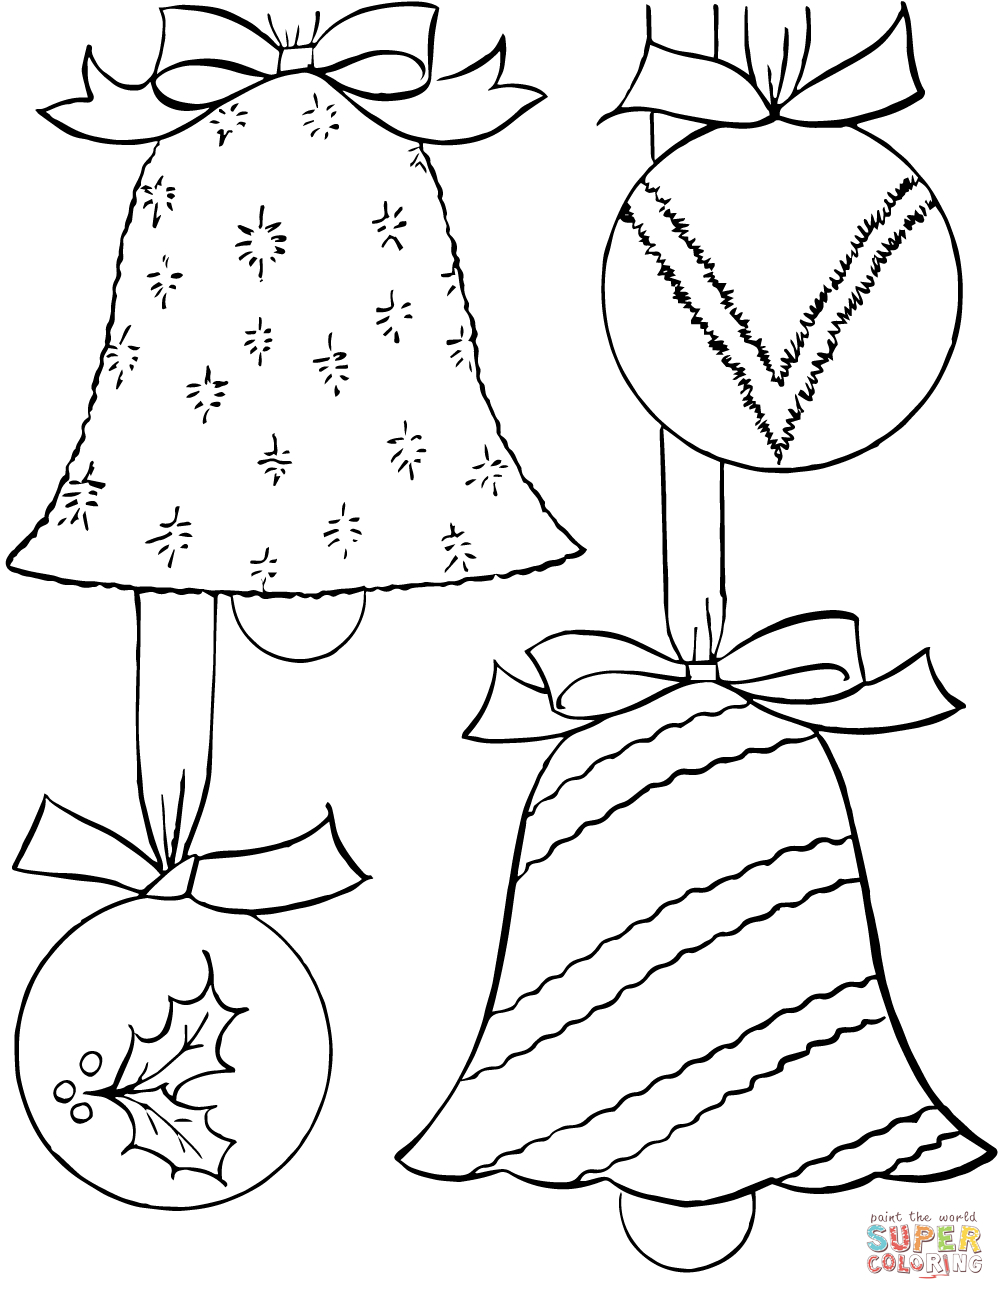 Christmas Ornaments Coloring Page | Free Printable Coloring Pages - Free Printable Christmas Tree Ornaments To Color